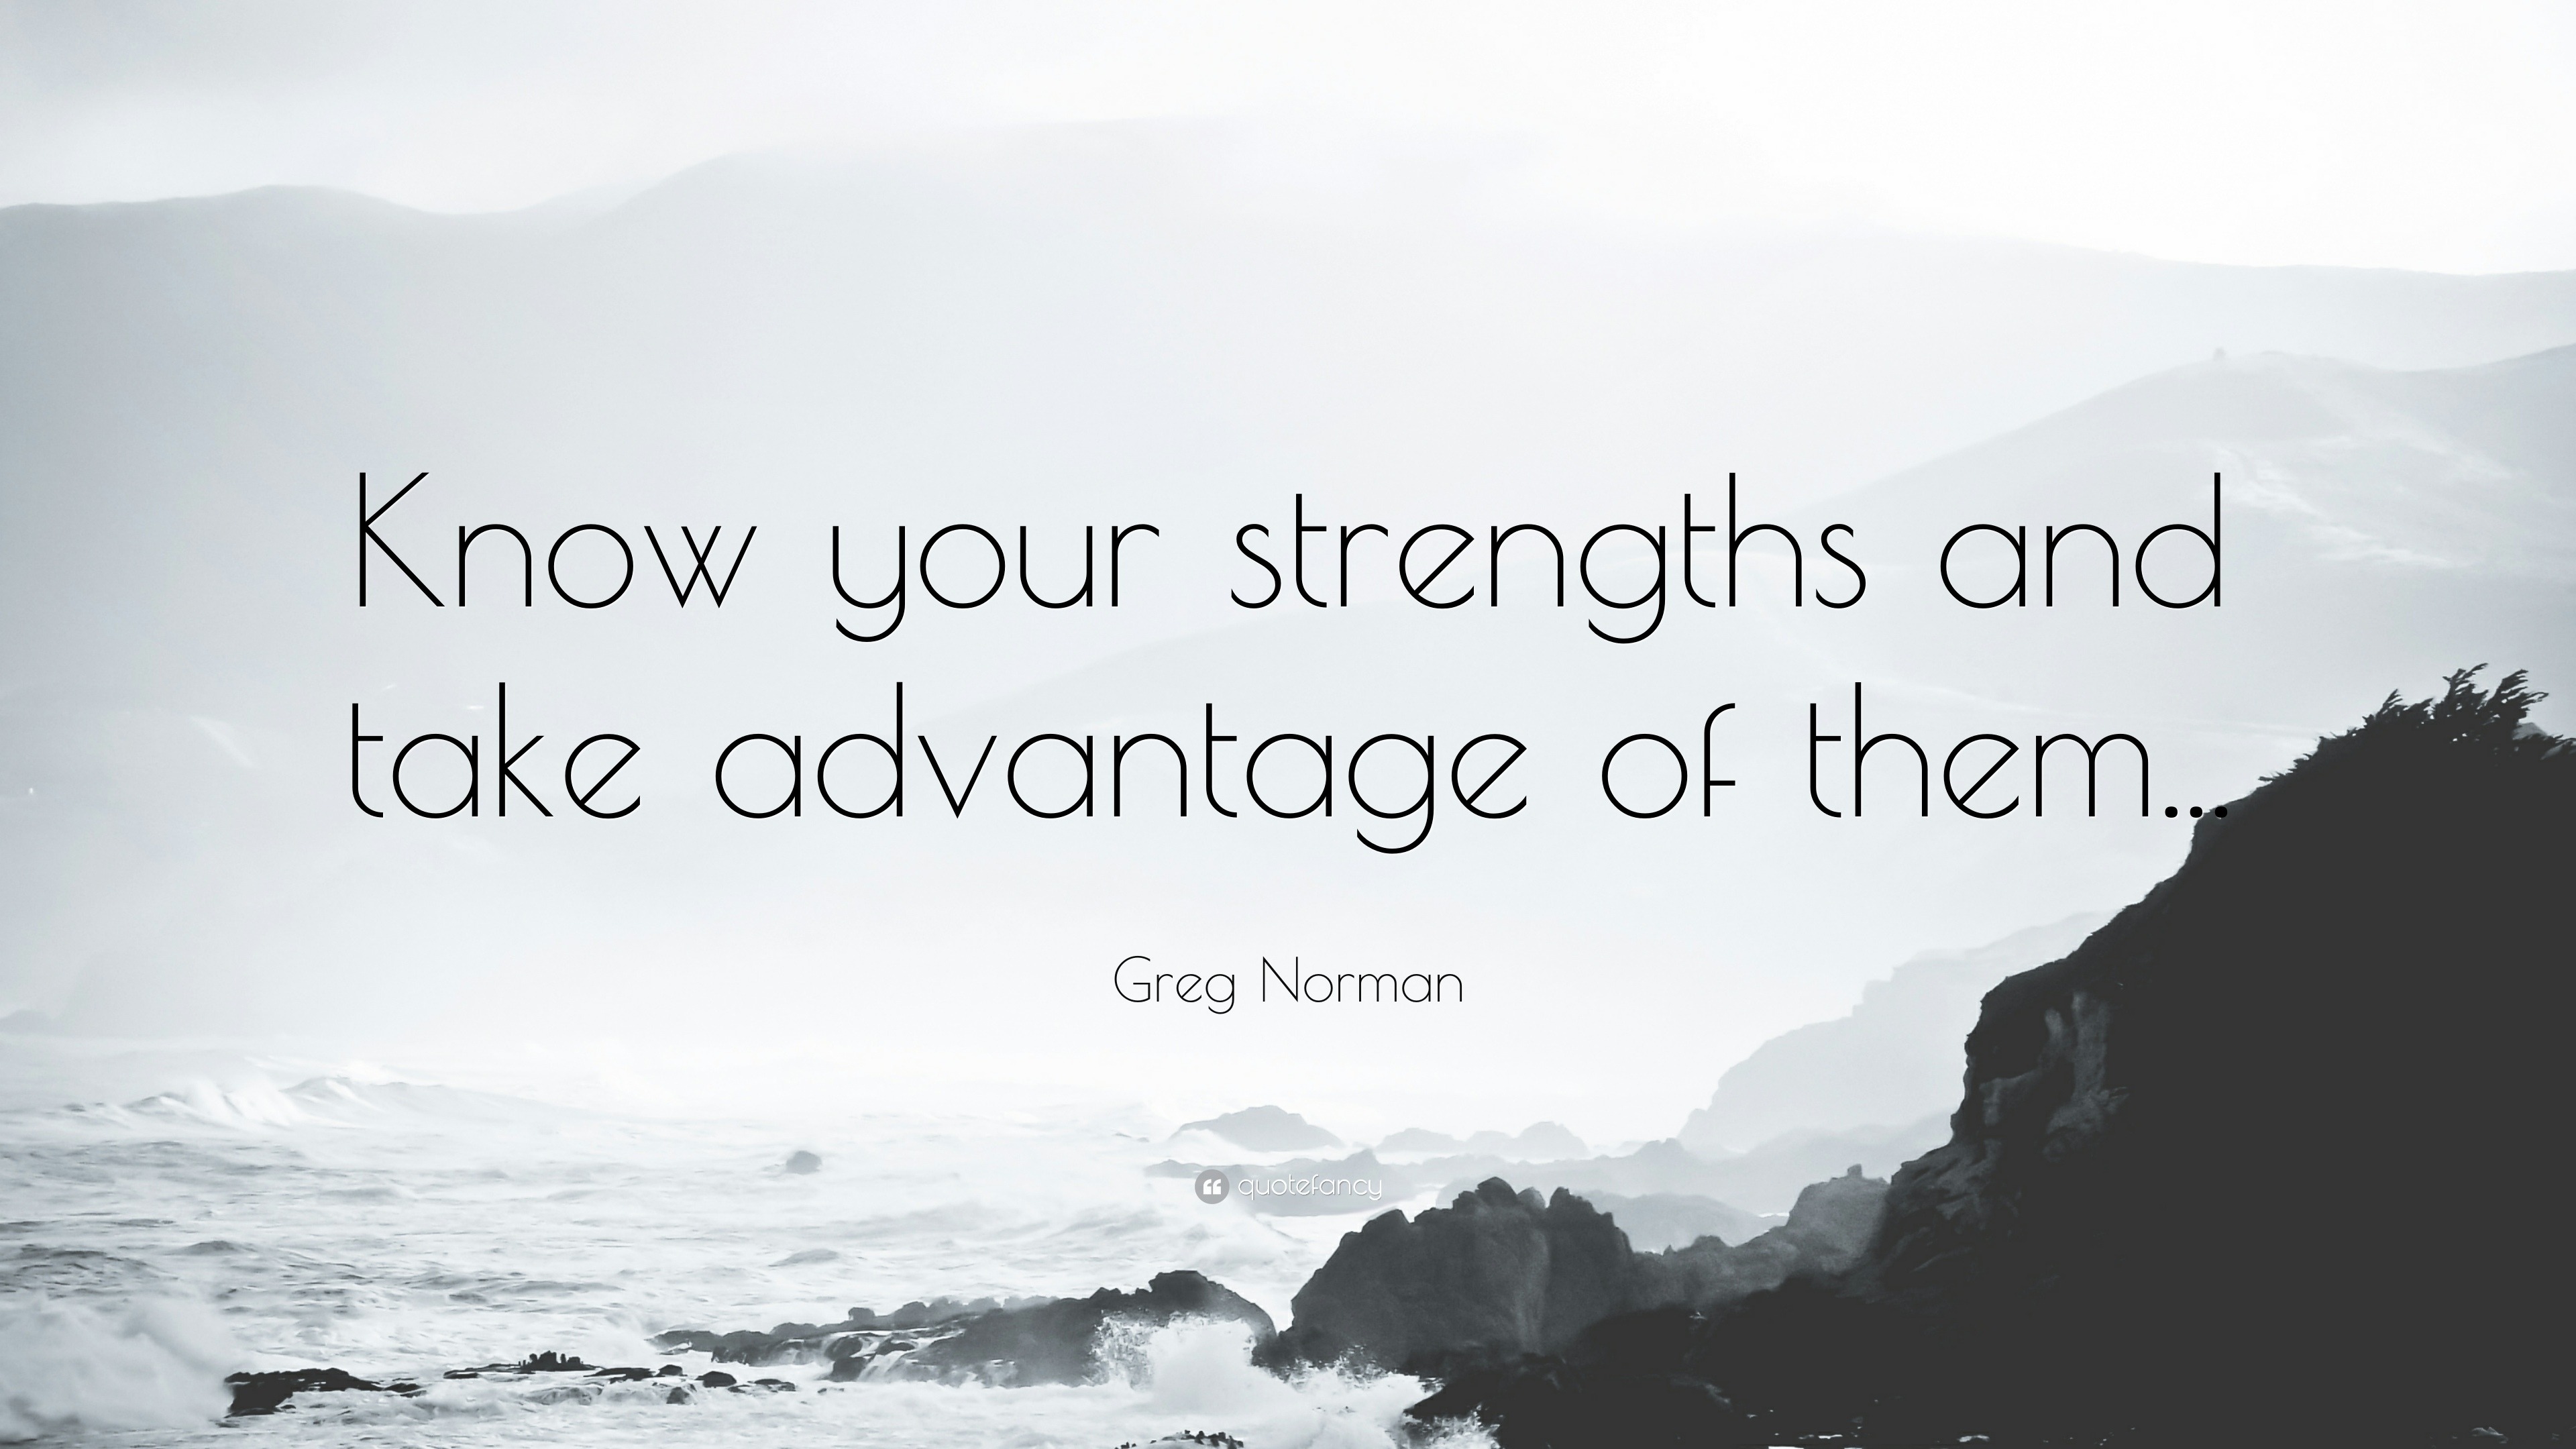 Greg Norman quote: Our success is a direct result of knowing how to